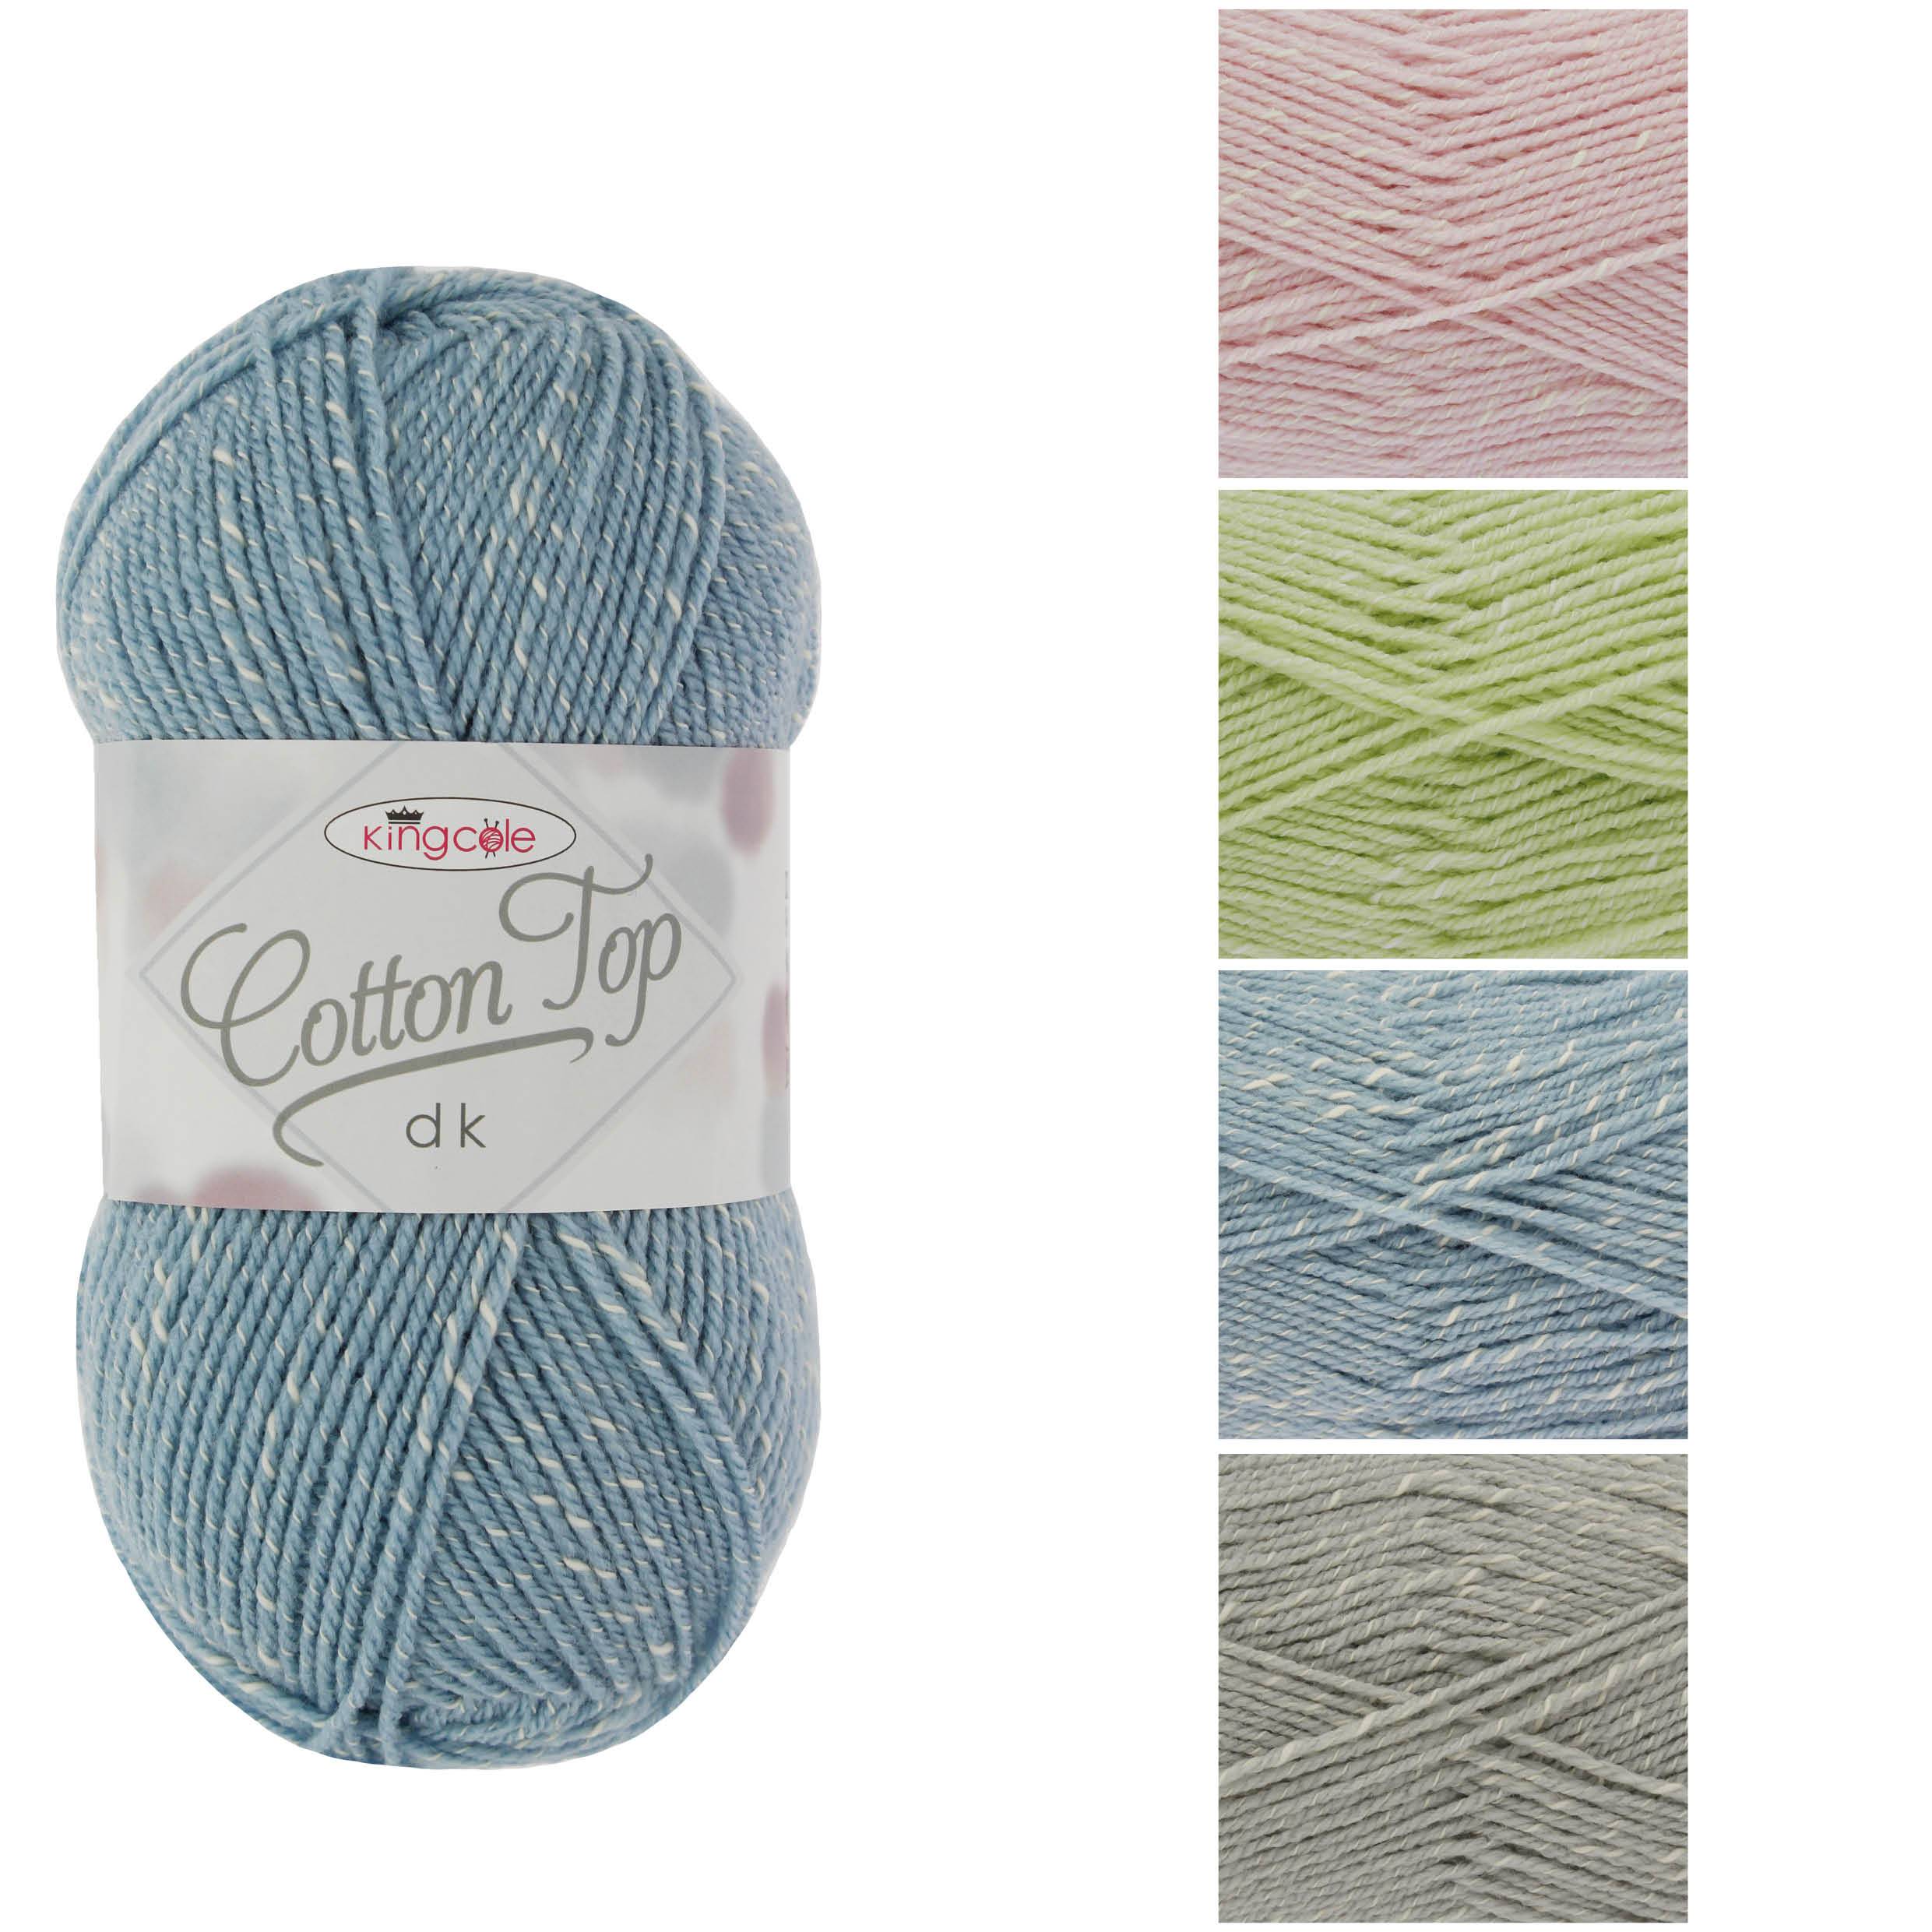 COTTON TOP DK Knitting Yarn by King Cole * Cotton Blend Knitting